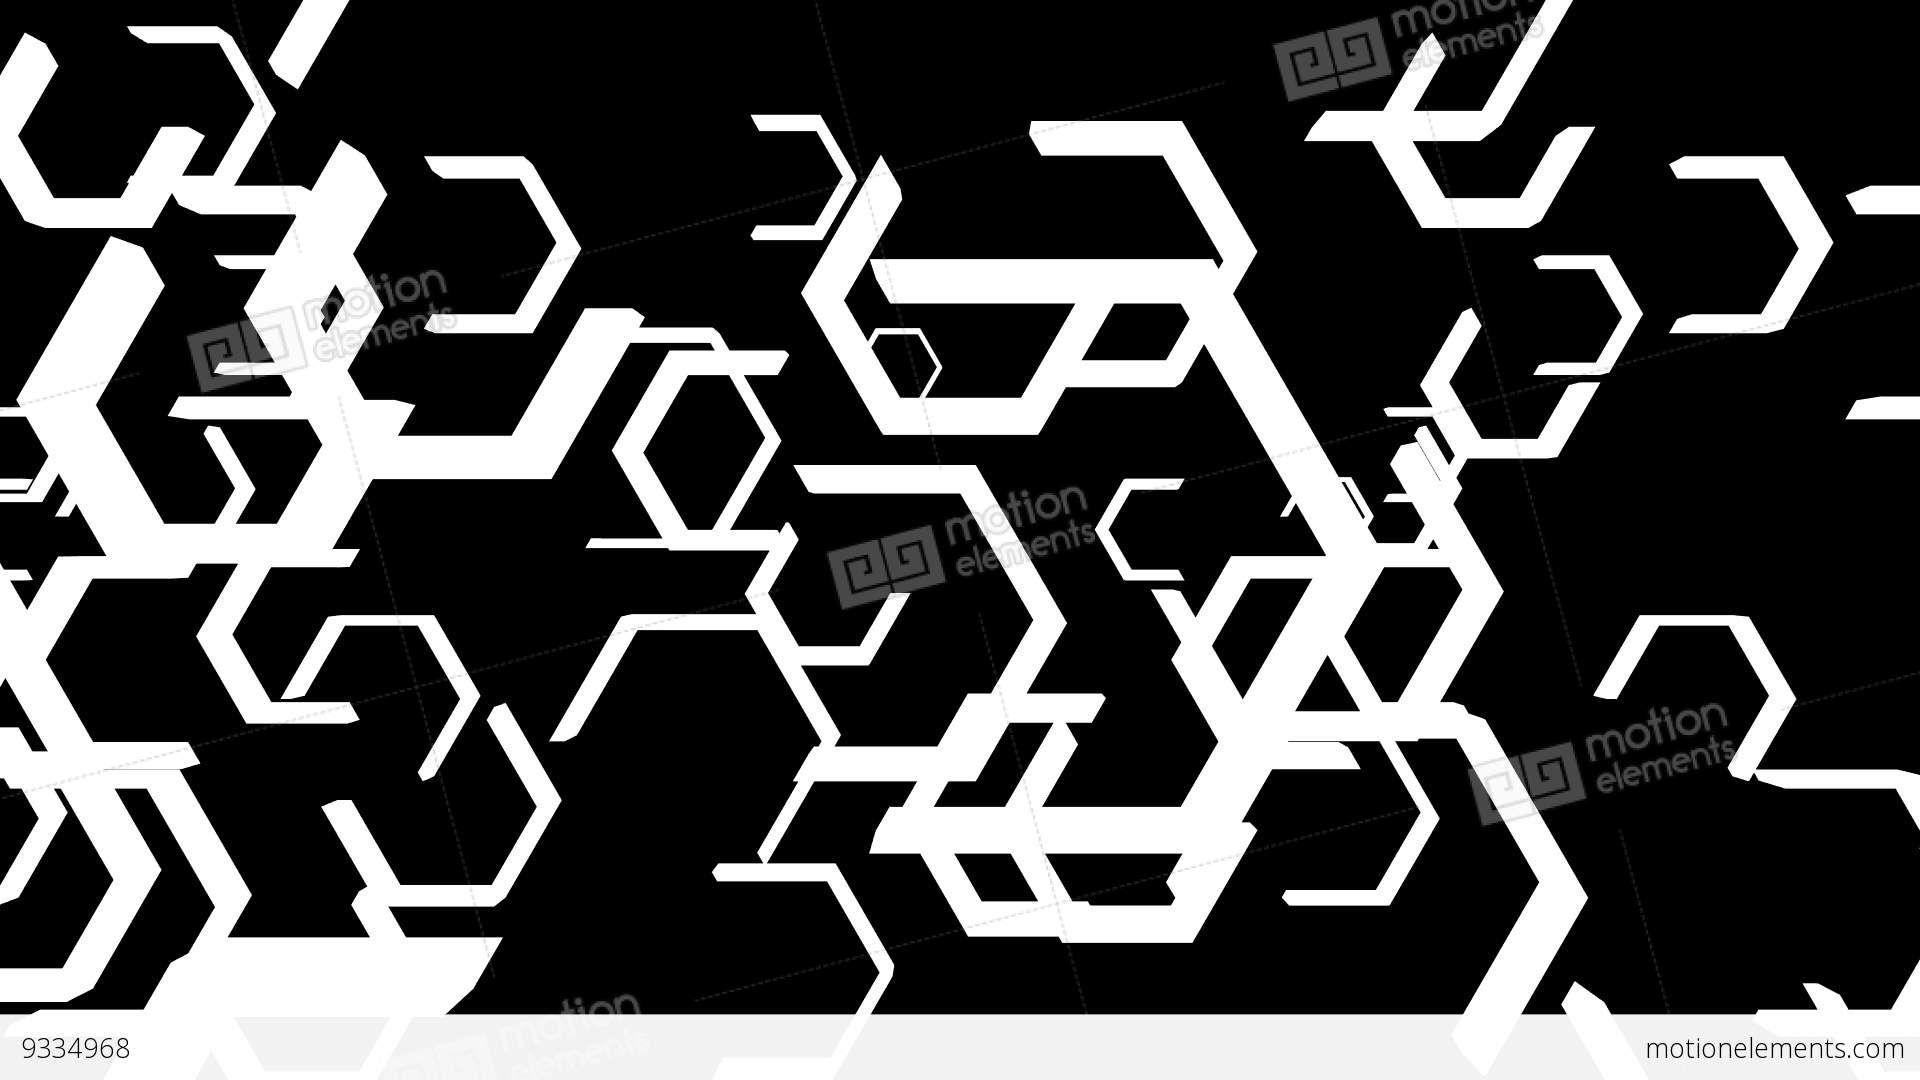 Black and White Hexagon Logo - Moving Black And White Hexagon Shapes Scrolling In 3D Space Stock